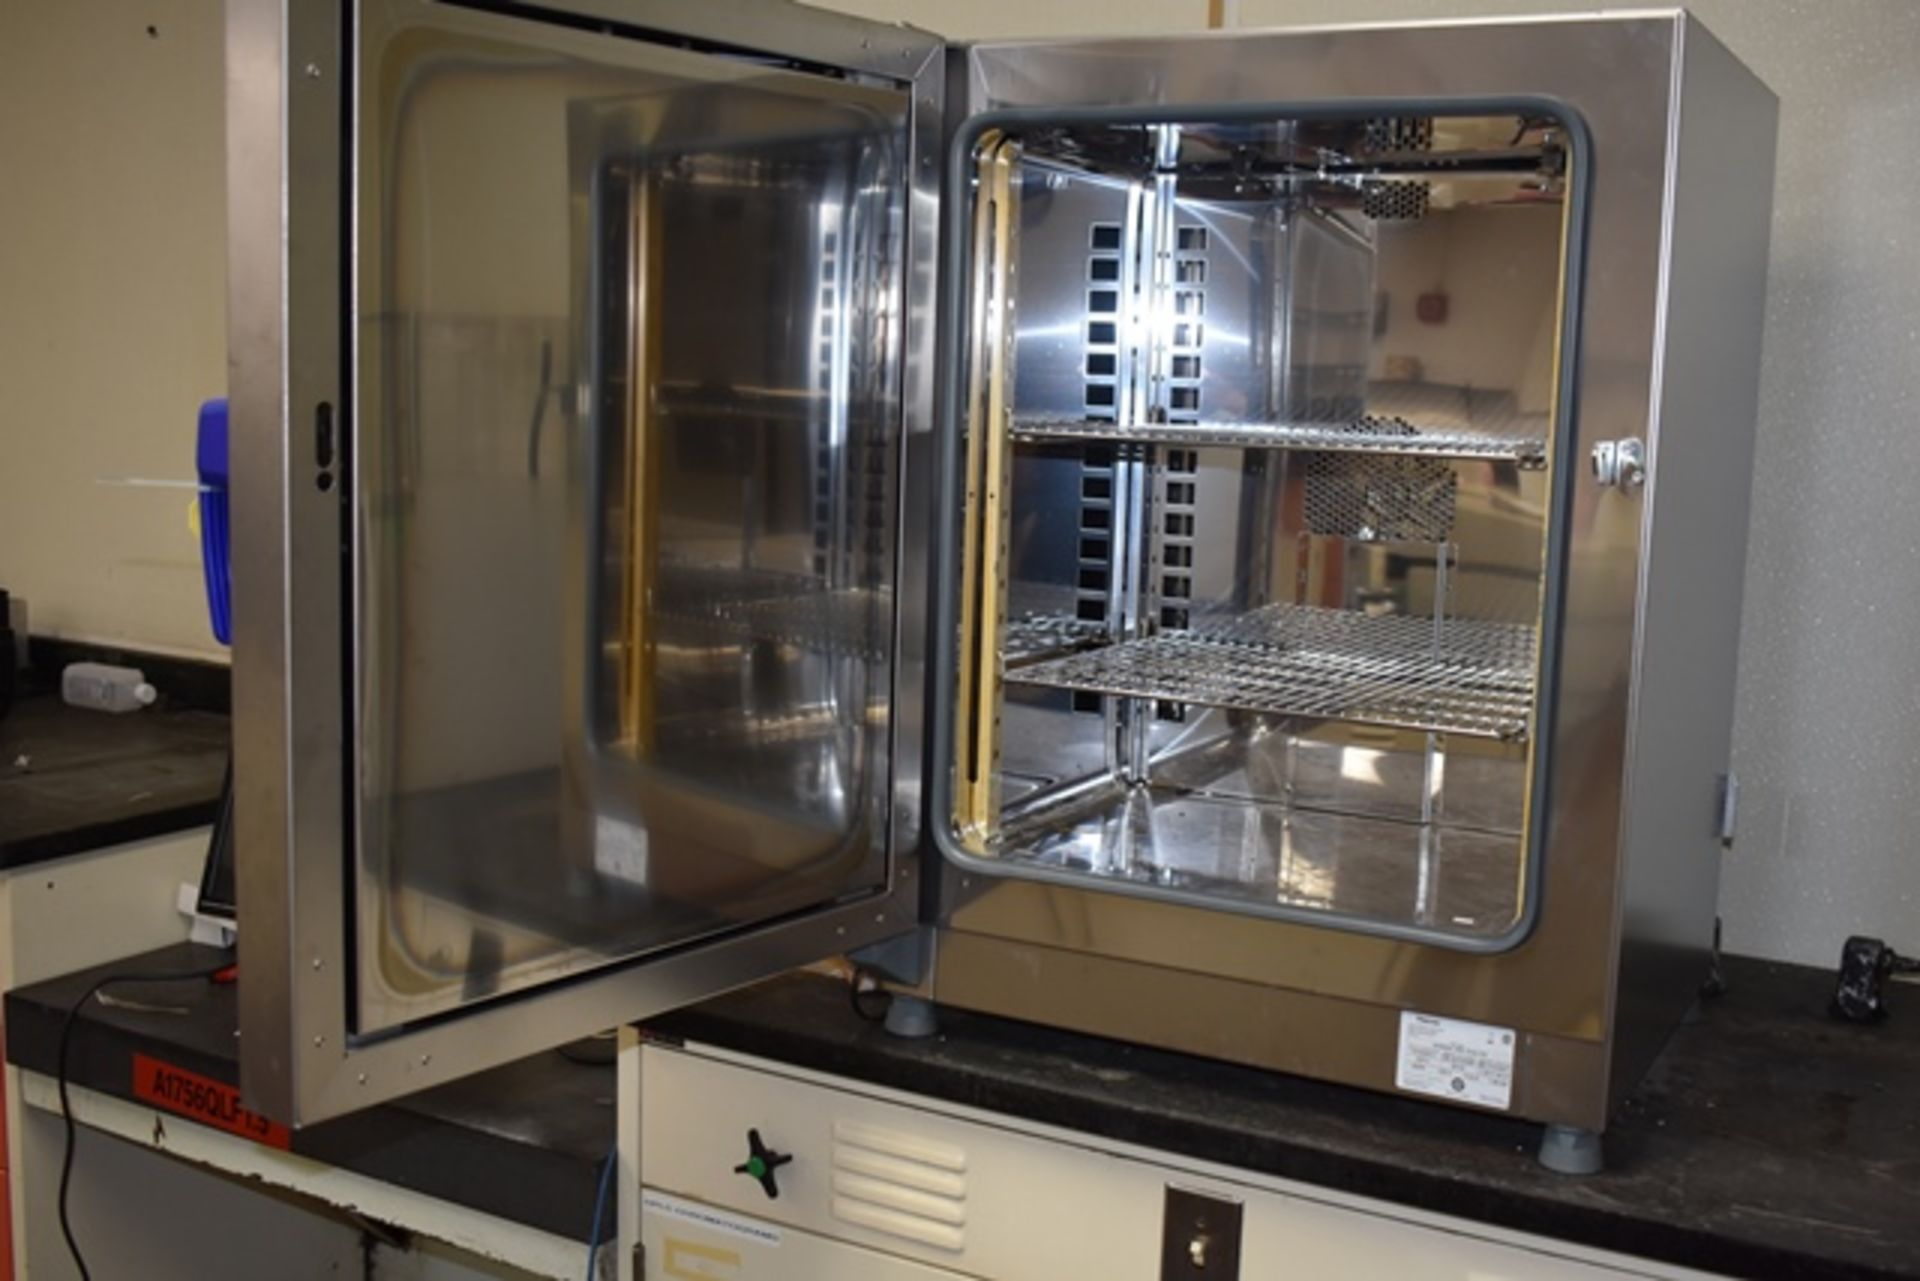 Fischer Scientific lab oven, mod. Isotemp 100L, s/n 42143459 - Image 2 of 3